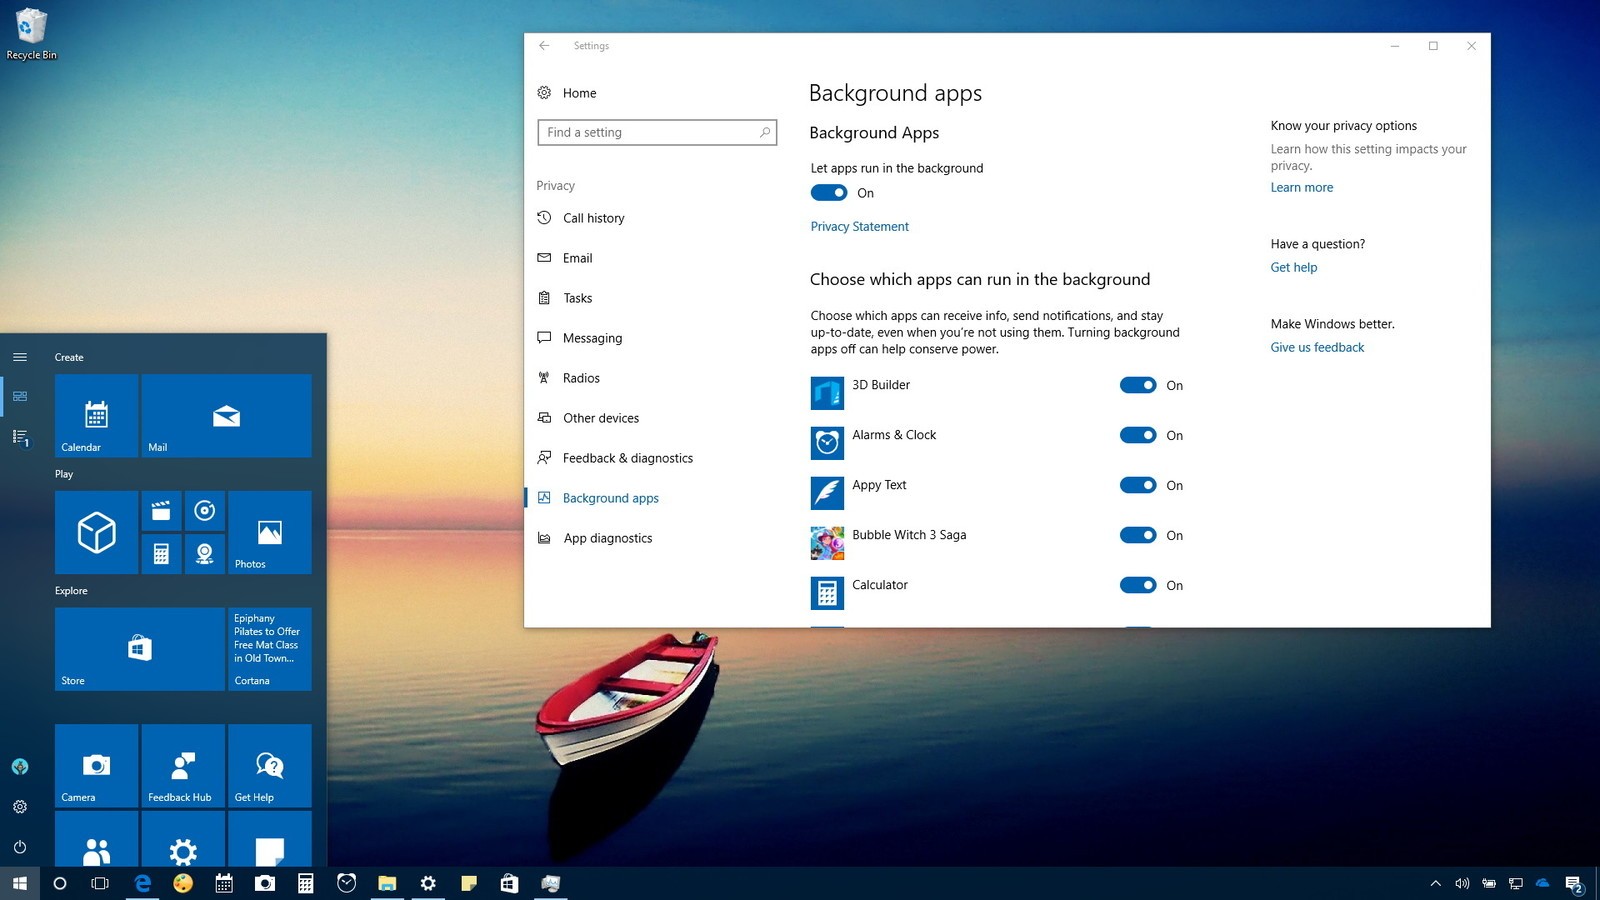 How to open Windows Store apps on startup in Windows 10